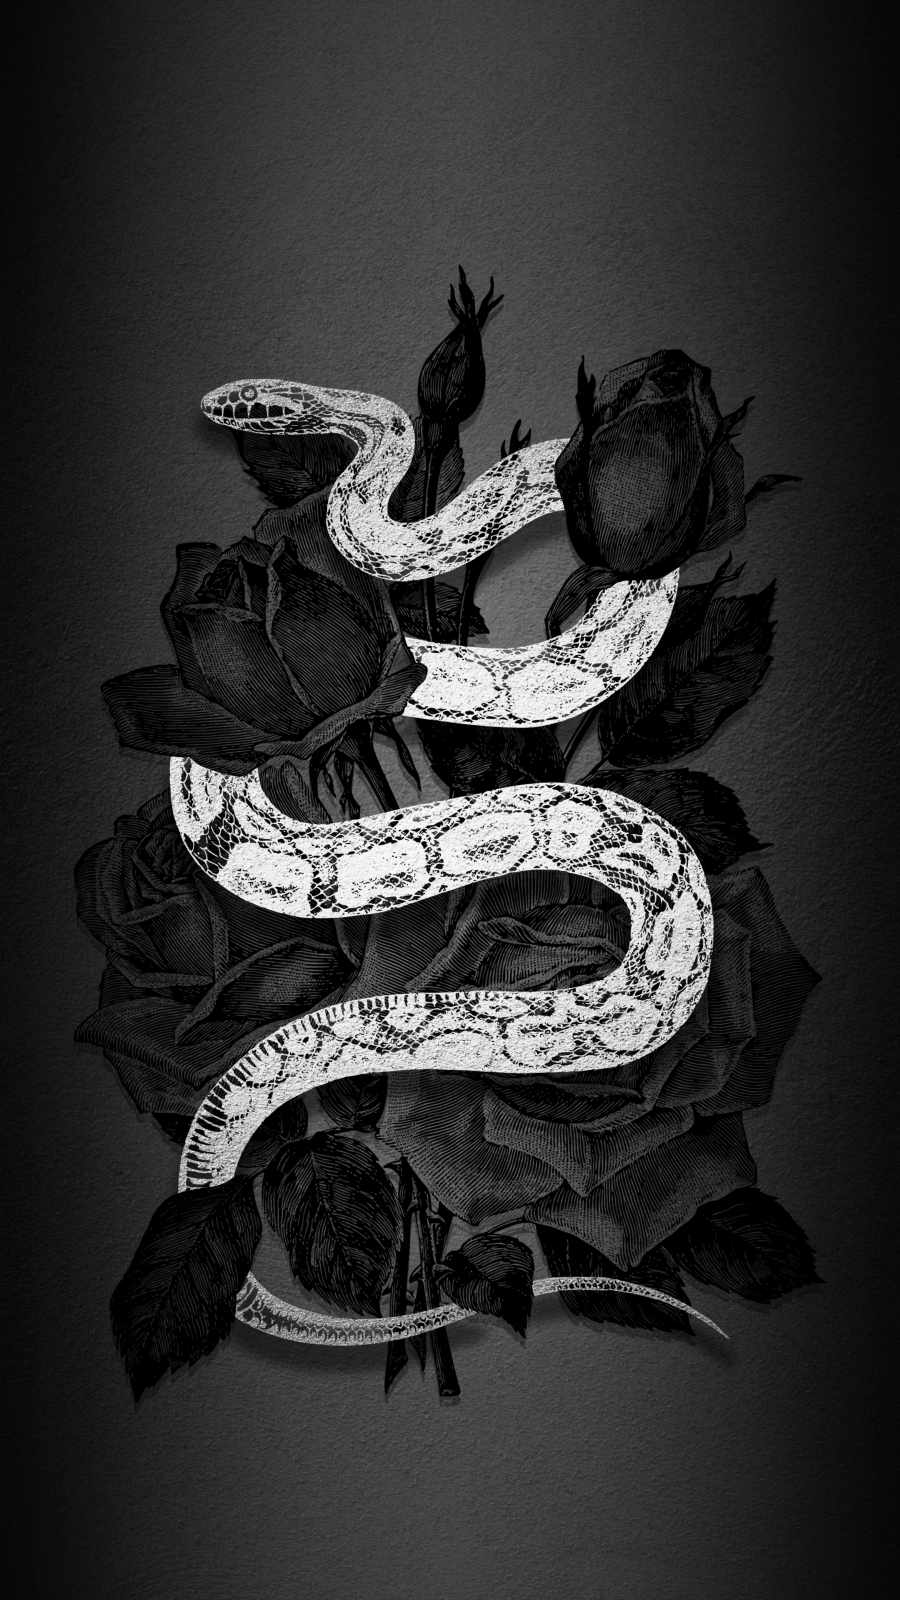 The snake and roses tattoo - Black and white, snake, roses